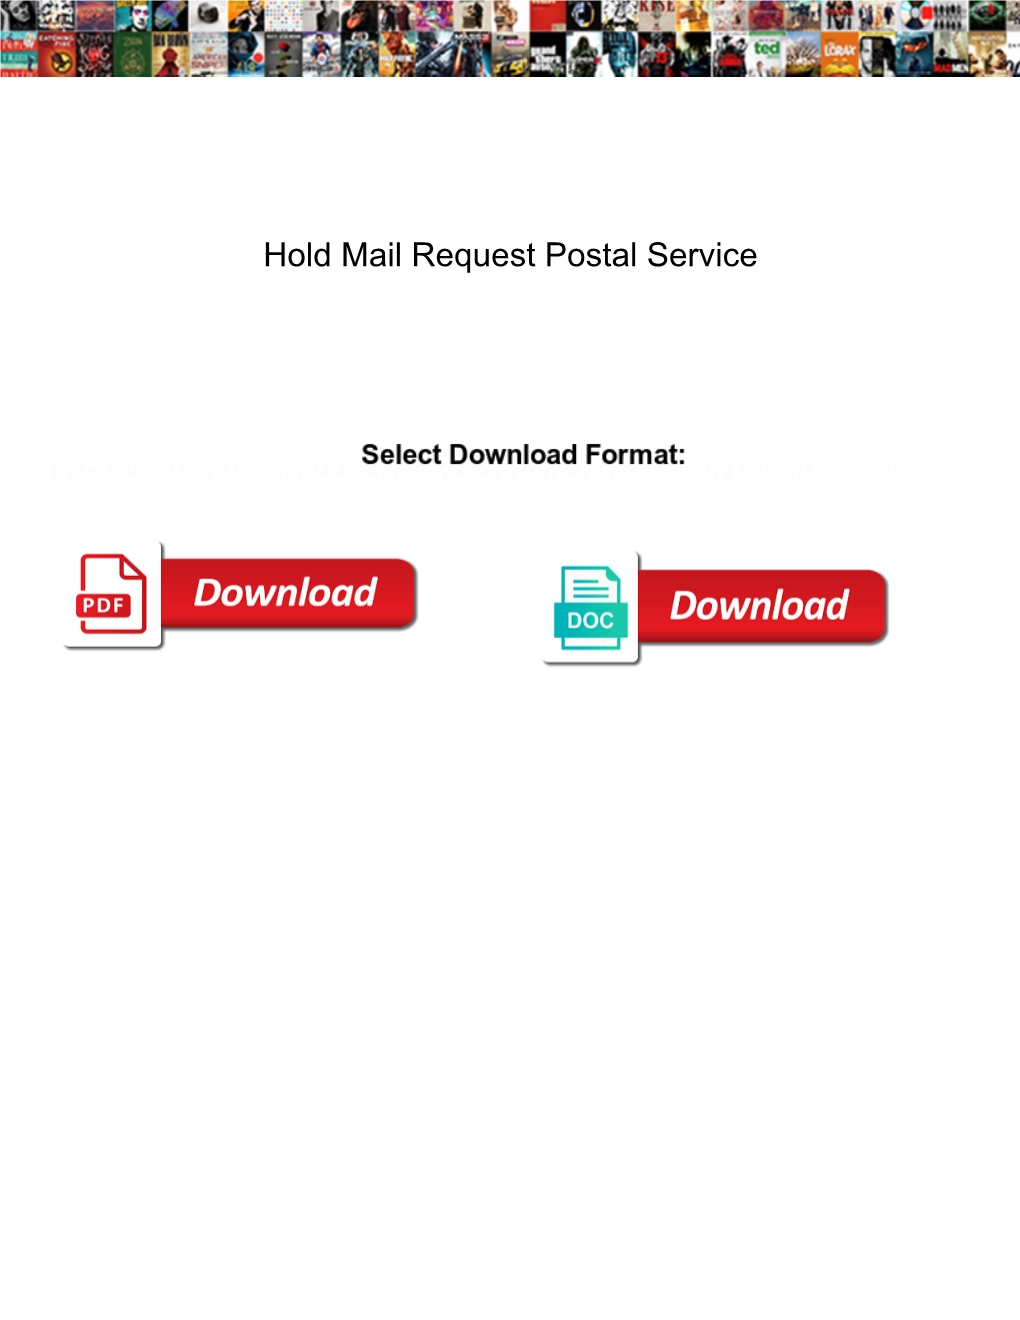 Hold Mail Request Postal Service